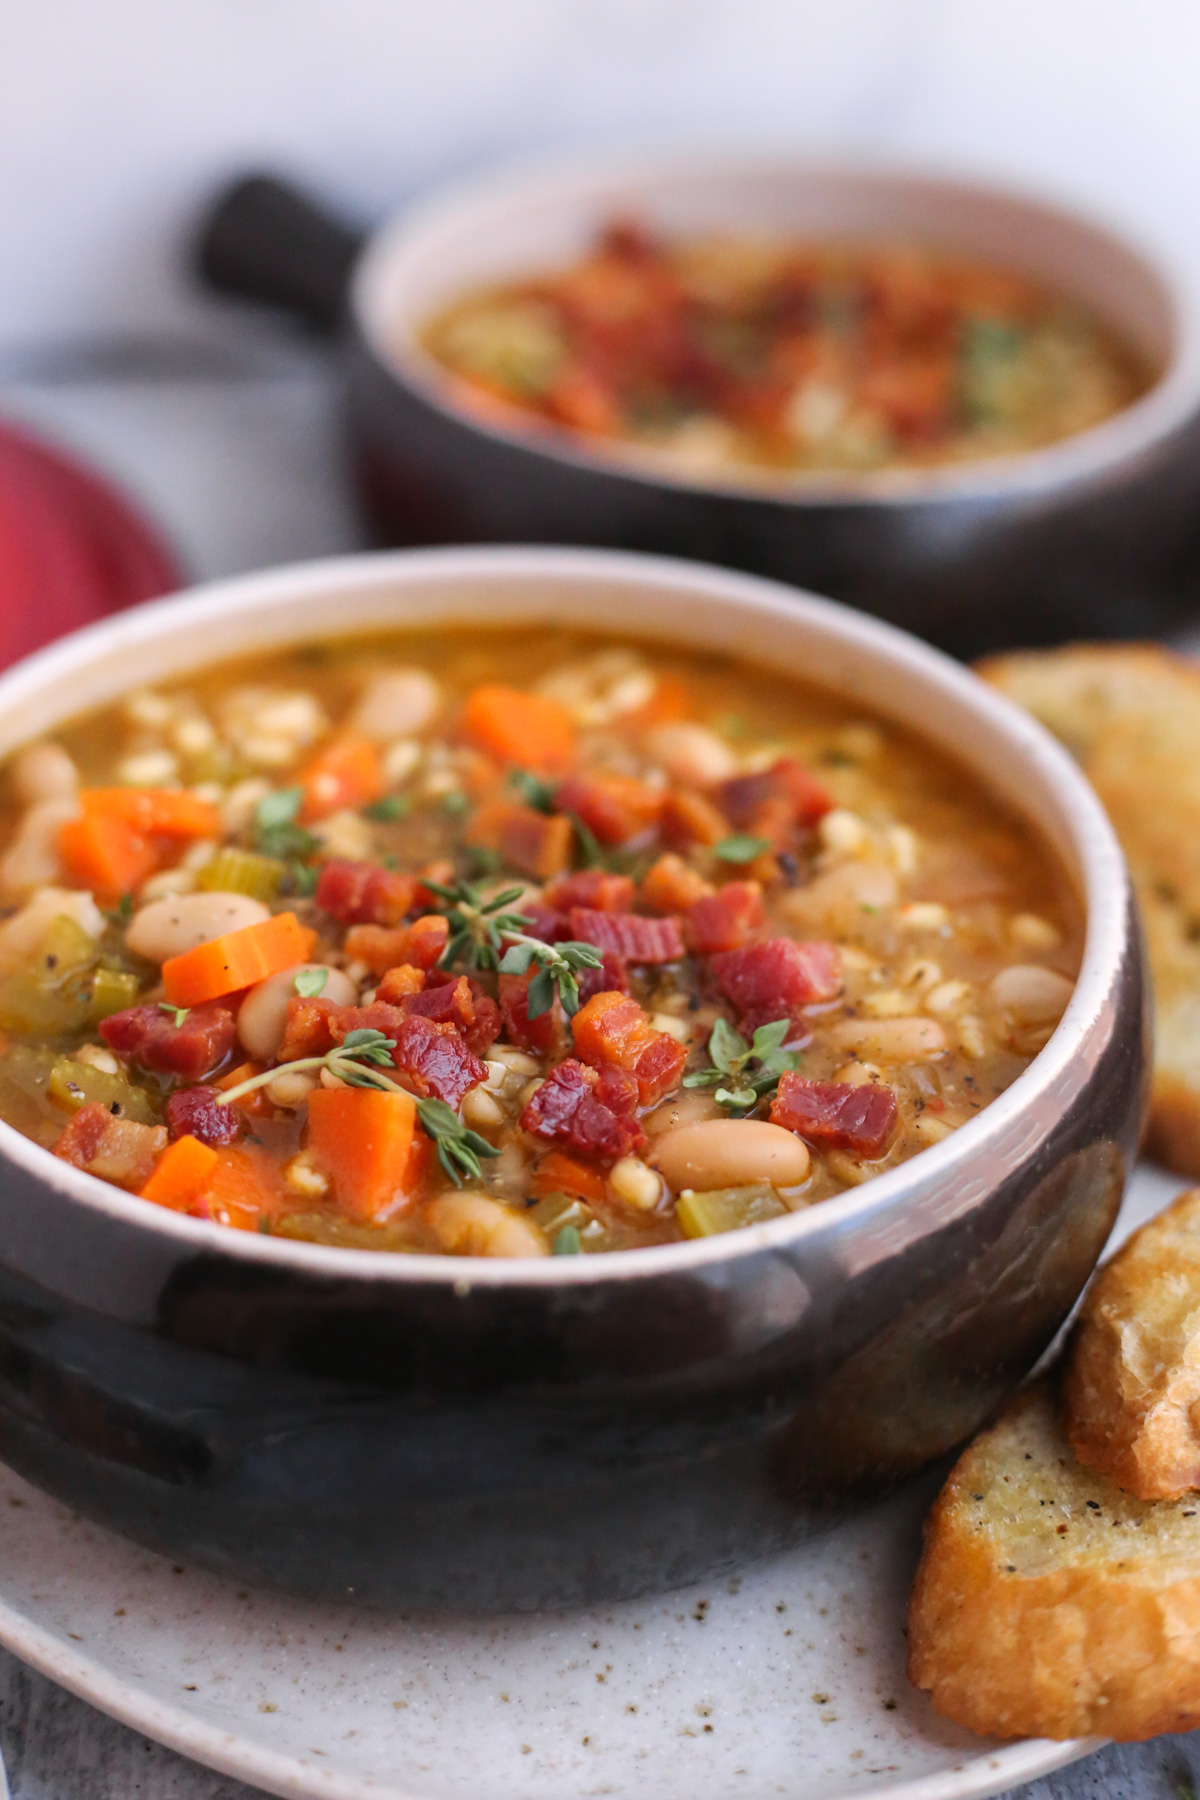 A close angled view into a soup bowl that holds a full serving of Great Northern Bean Soup. The soup looks savory and filling, topped with pancetta pieces and fresh thyme